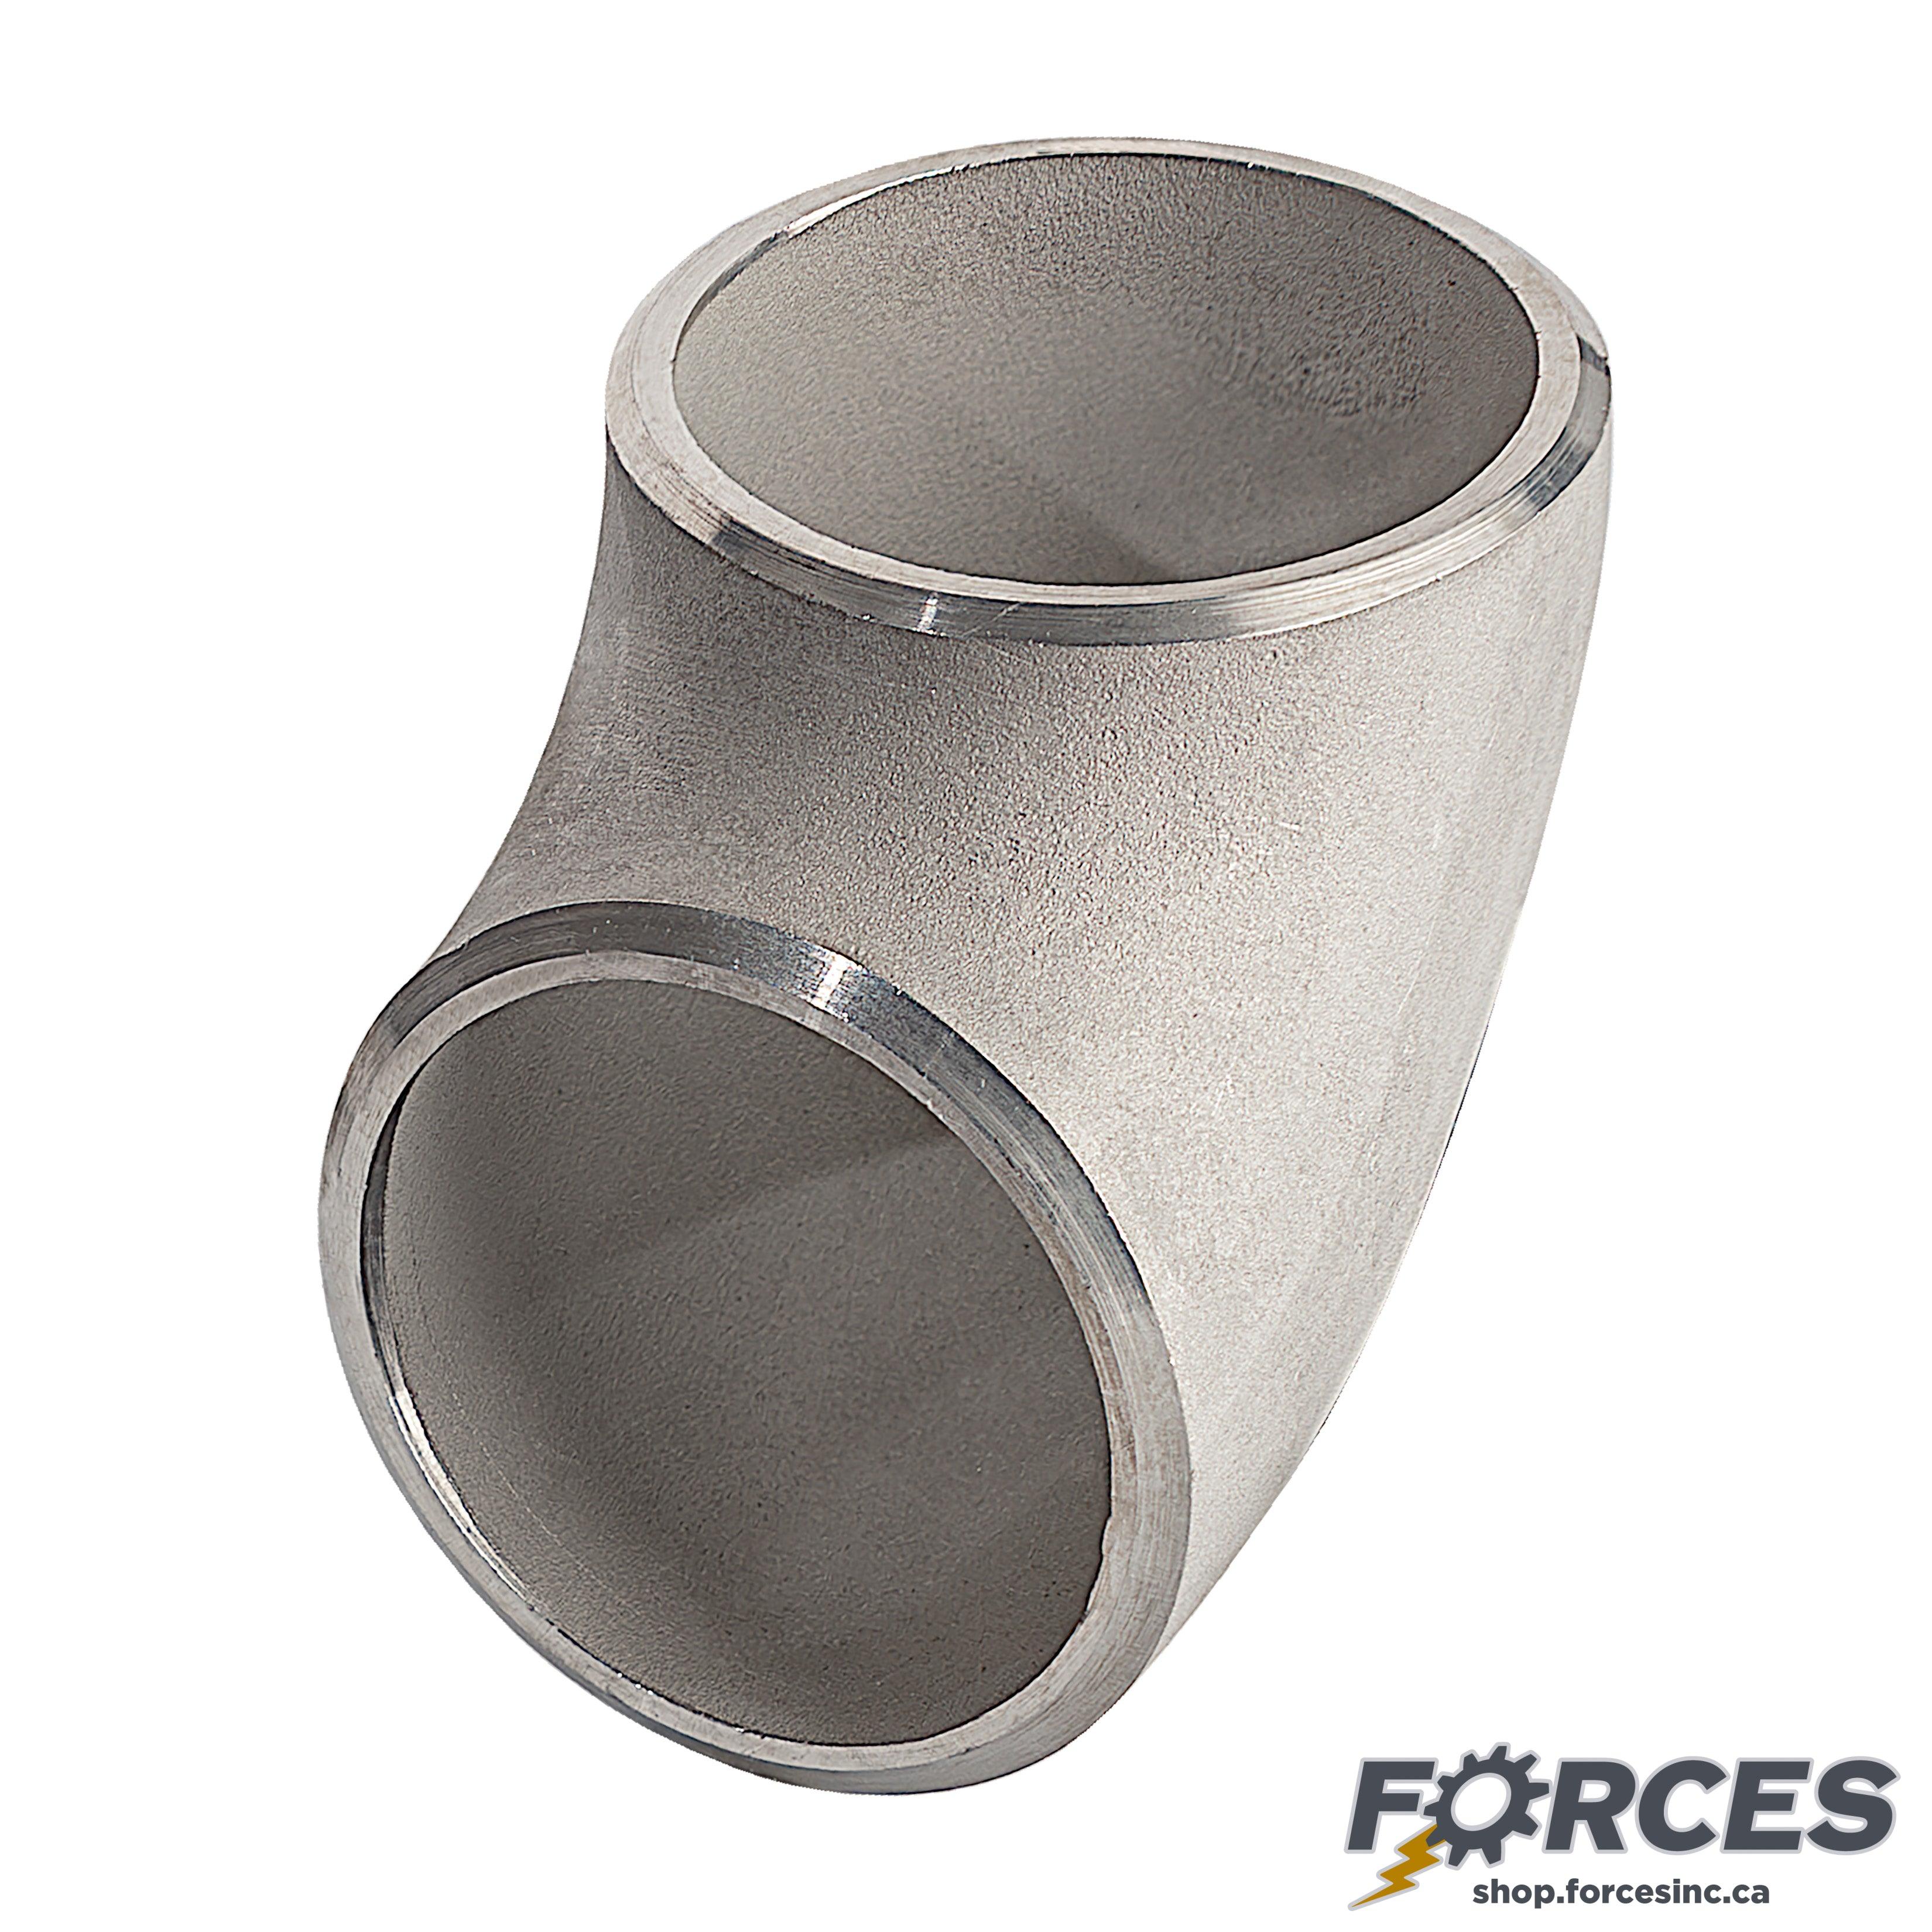 3/4" Elbow 45° SCH 40 Butt Weld - Stainless Steel 304 - Forces Inc